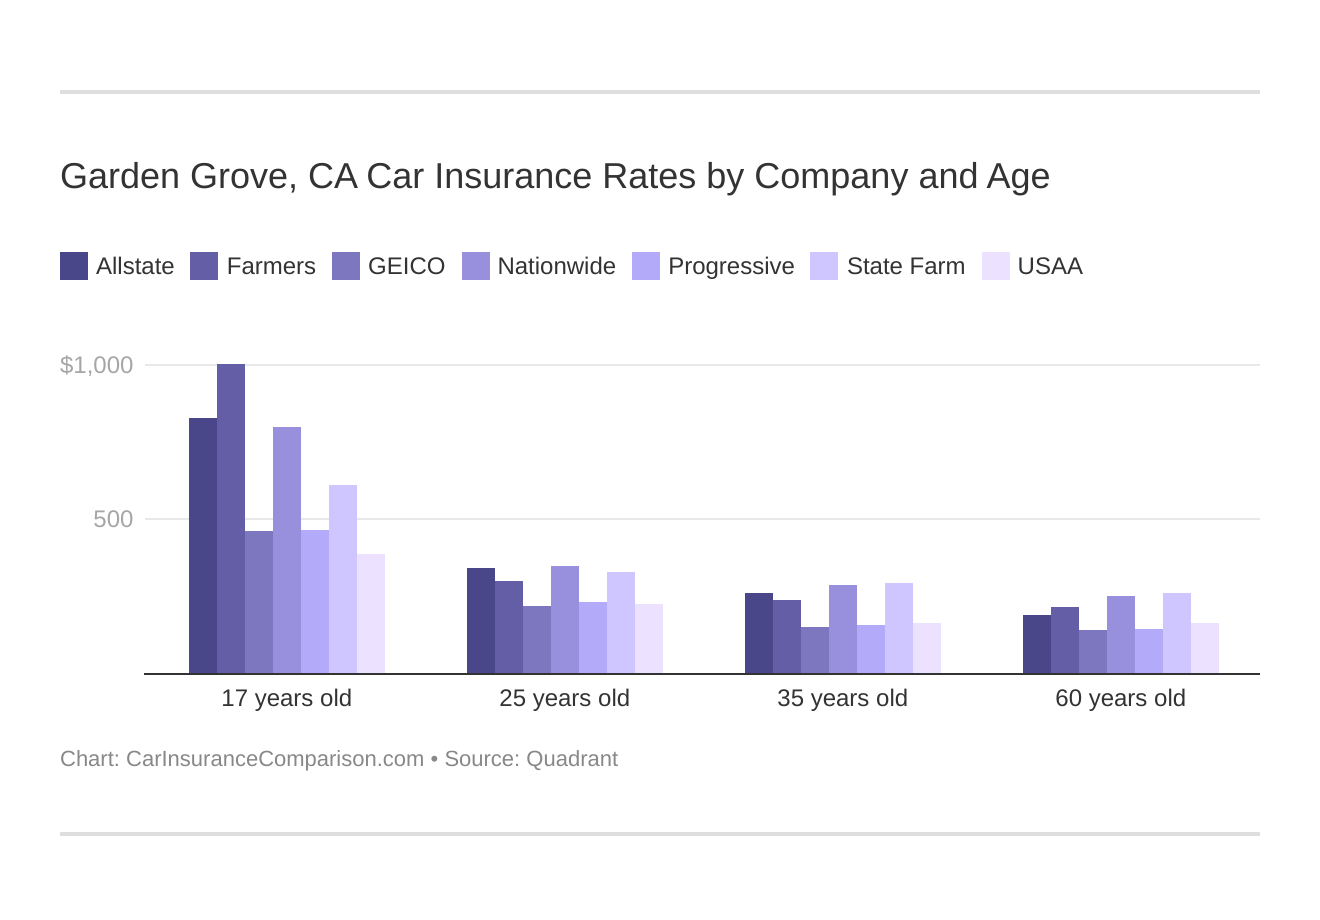 Garden Grove, CA Car Insurance Rates by Company and Age